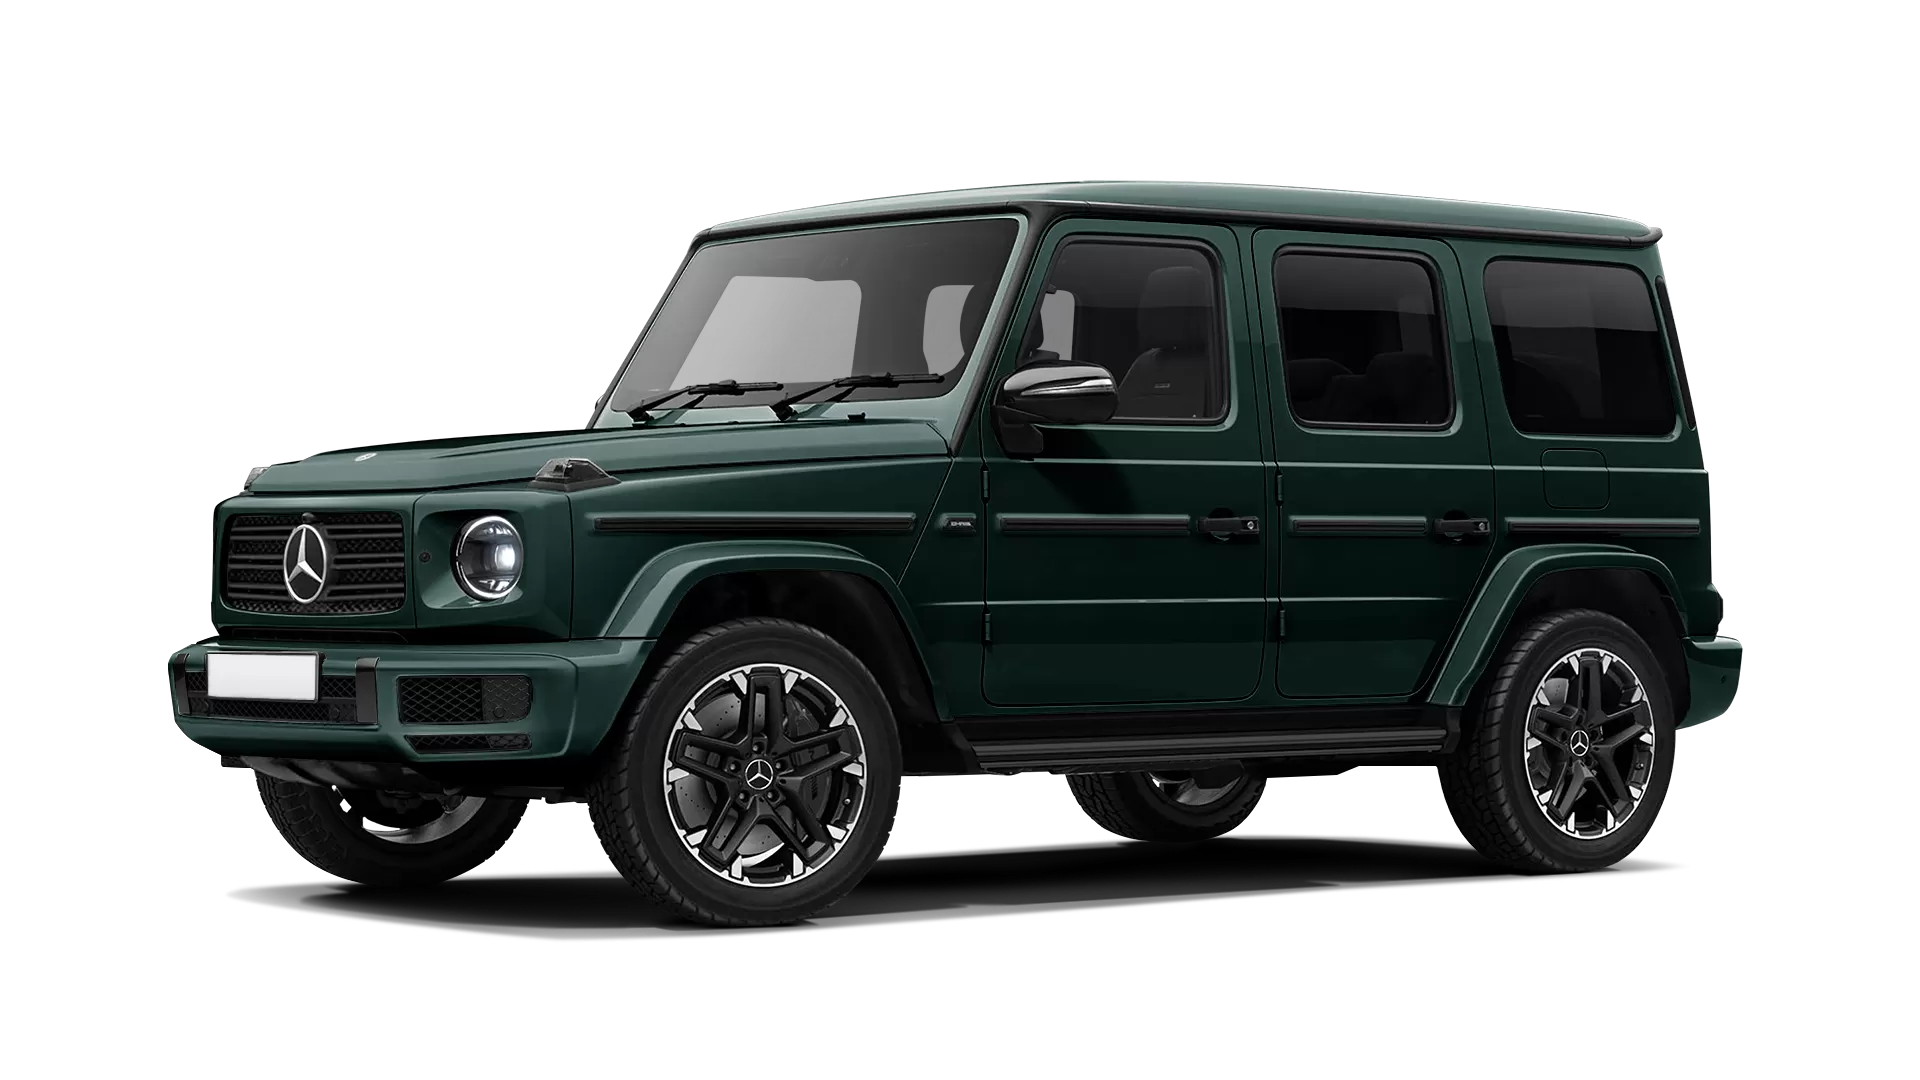 Mercedes G class W463 stock front view in Emerald Green color